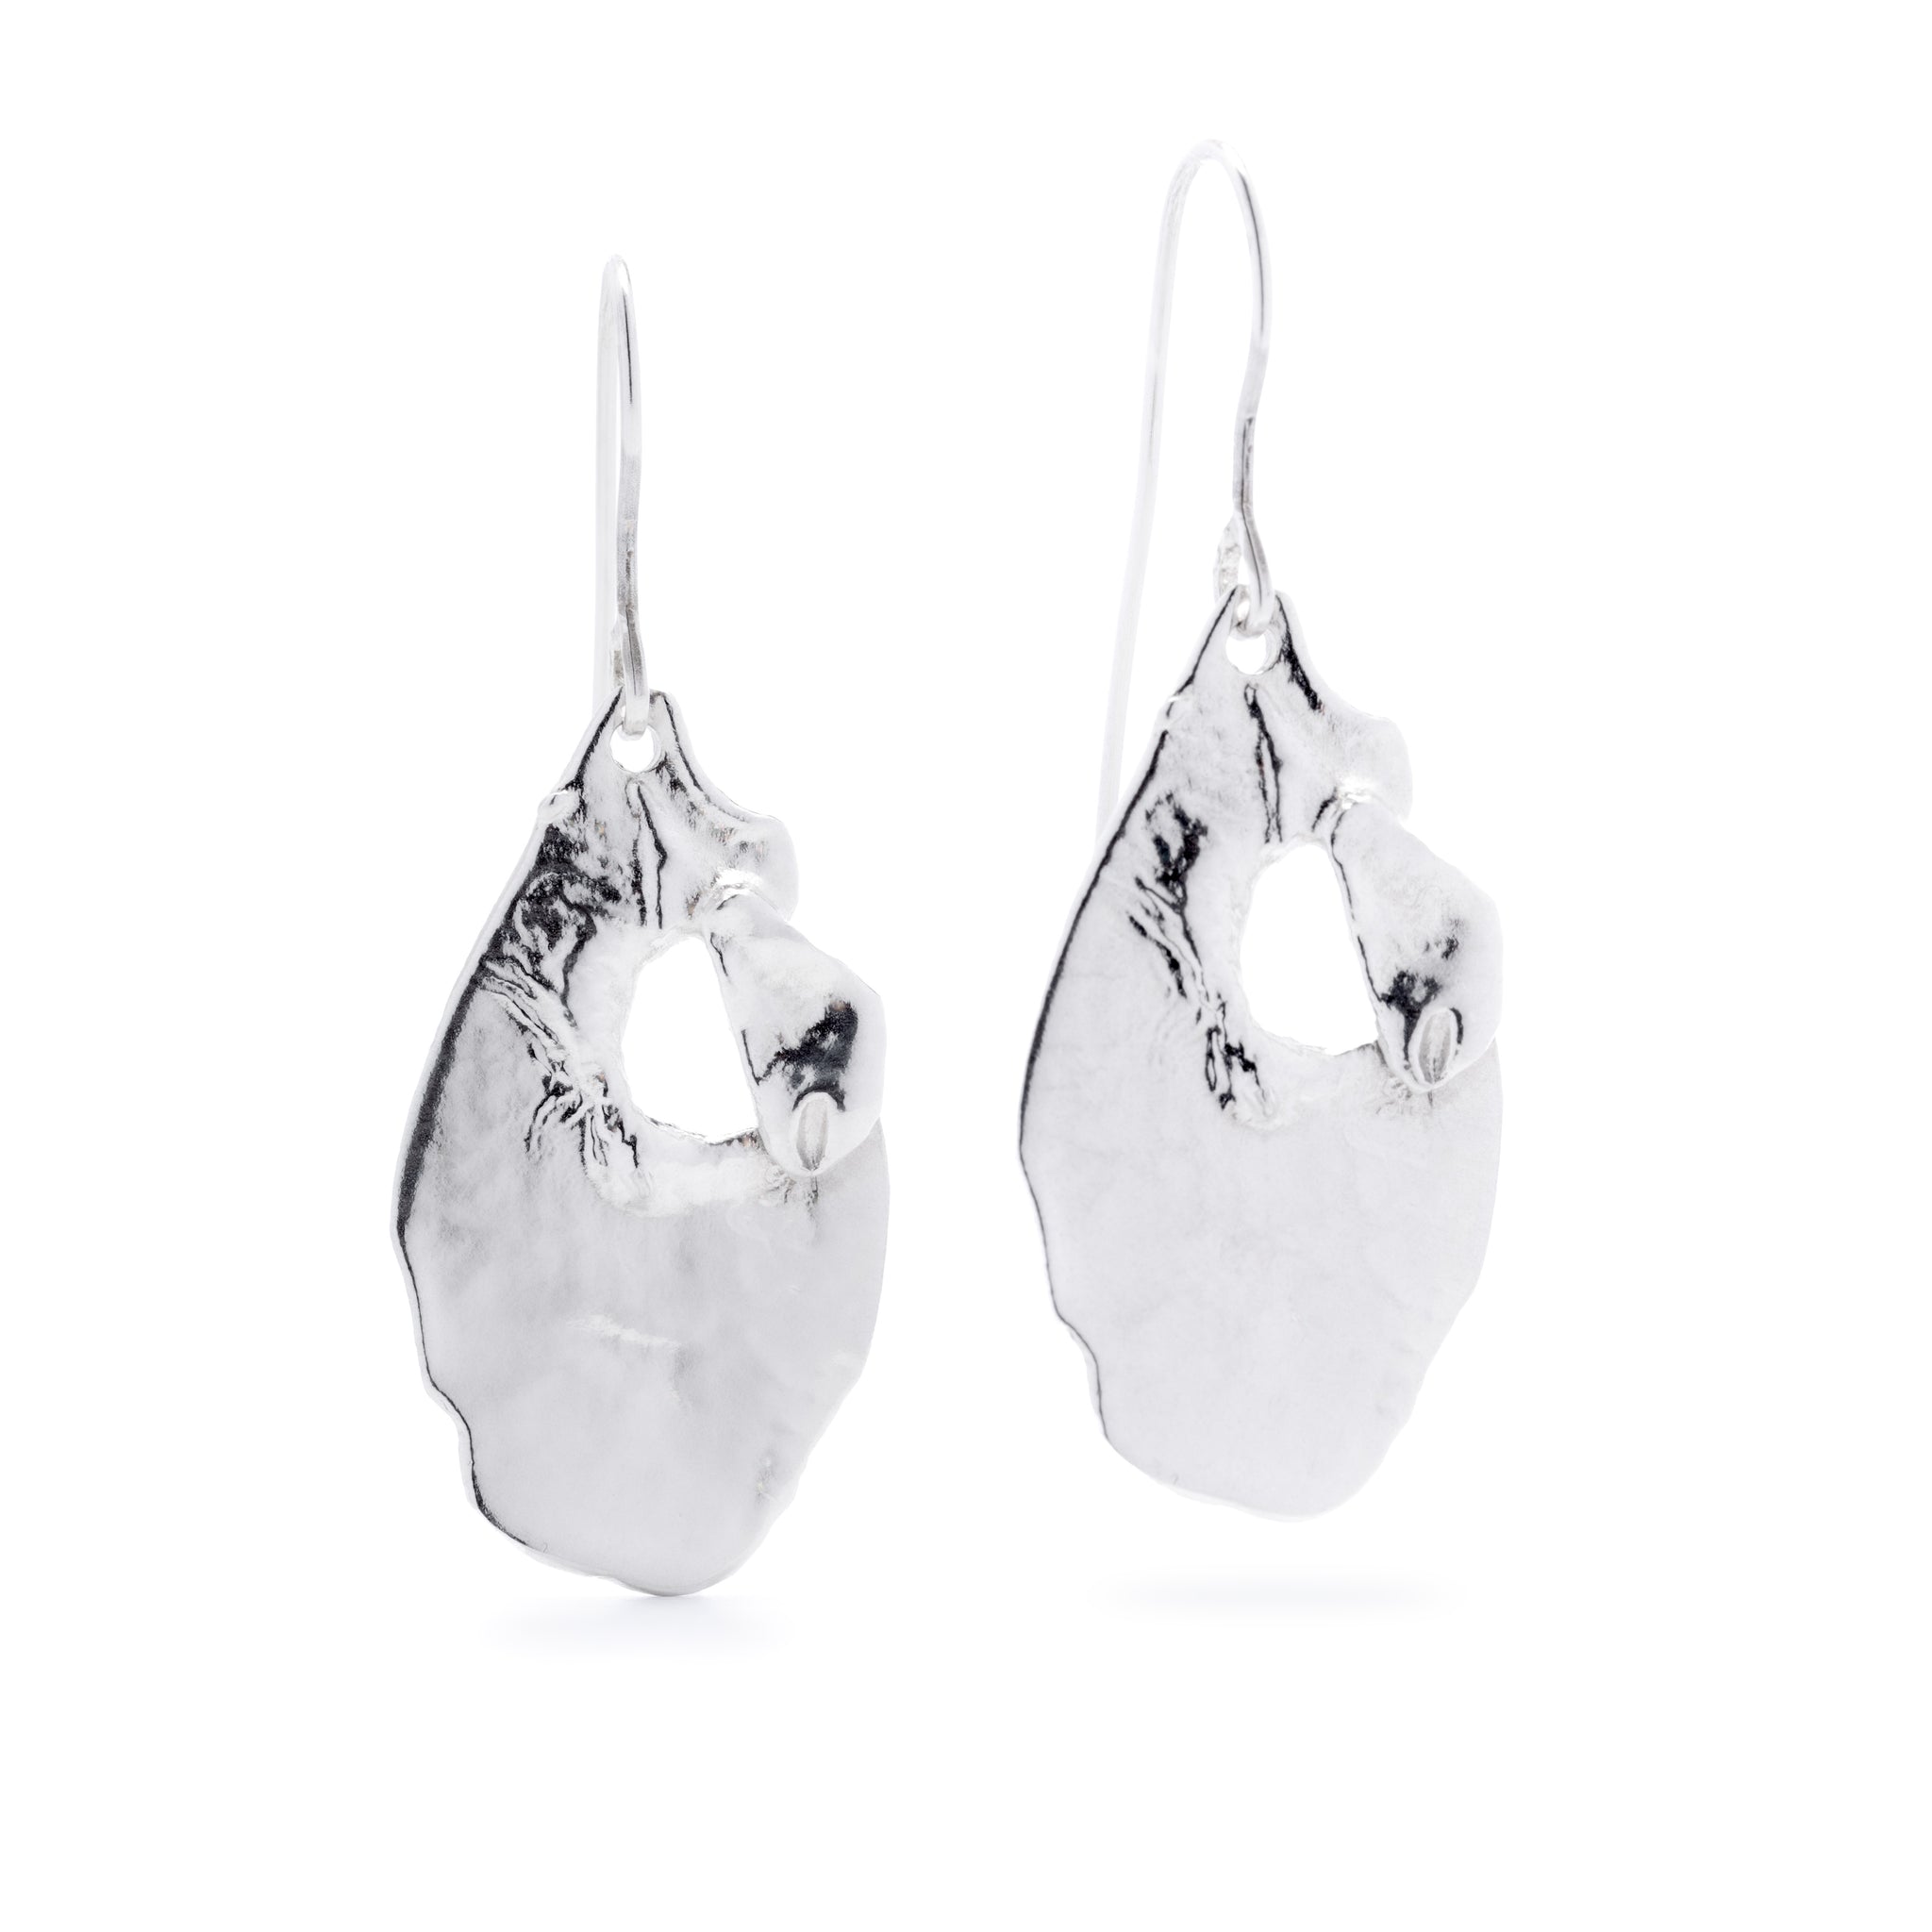 Sicilia Luce Earrings in Silver by What If You Stayed Textured earrings unique style